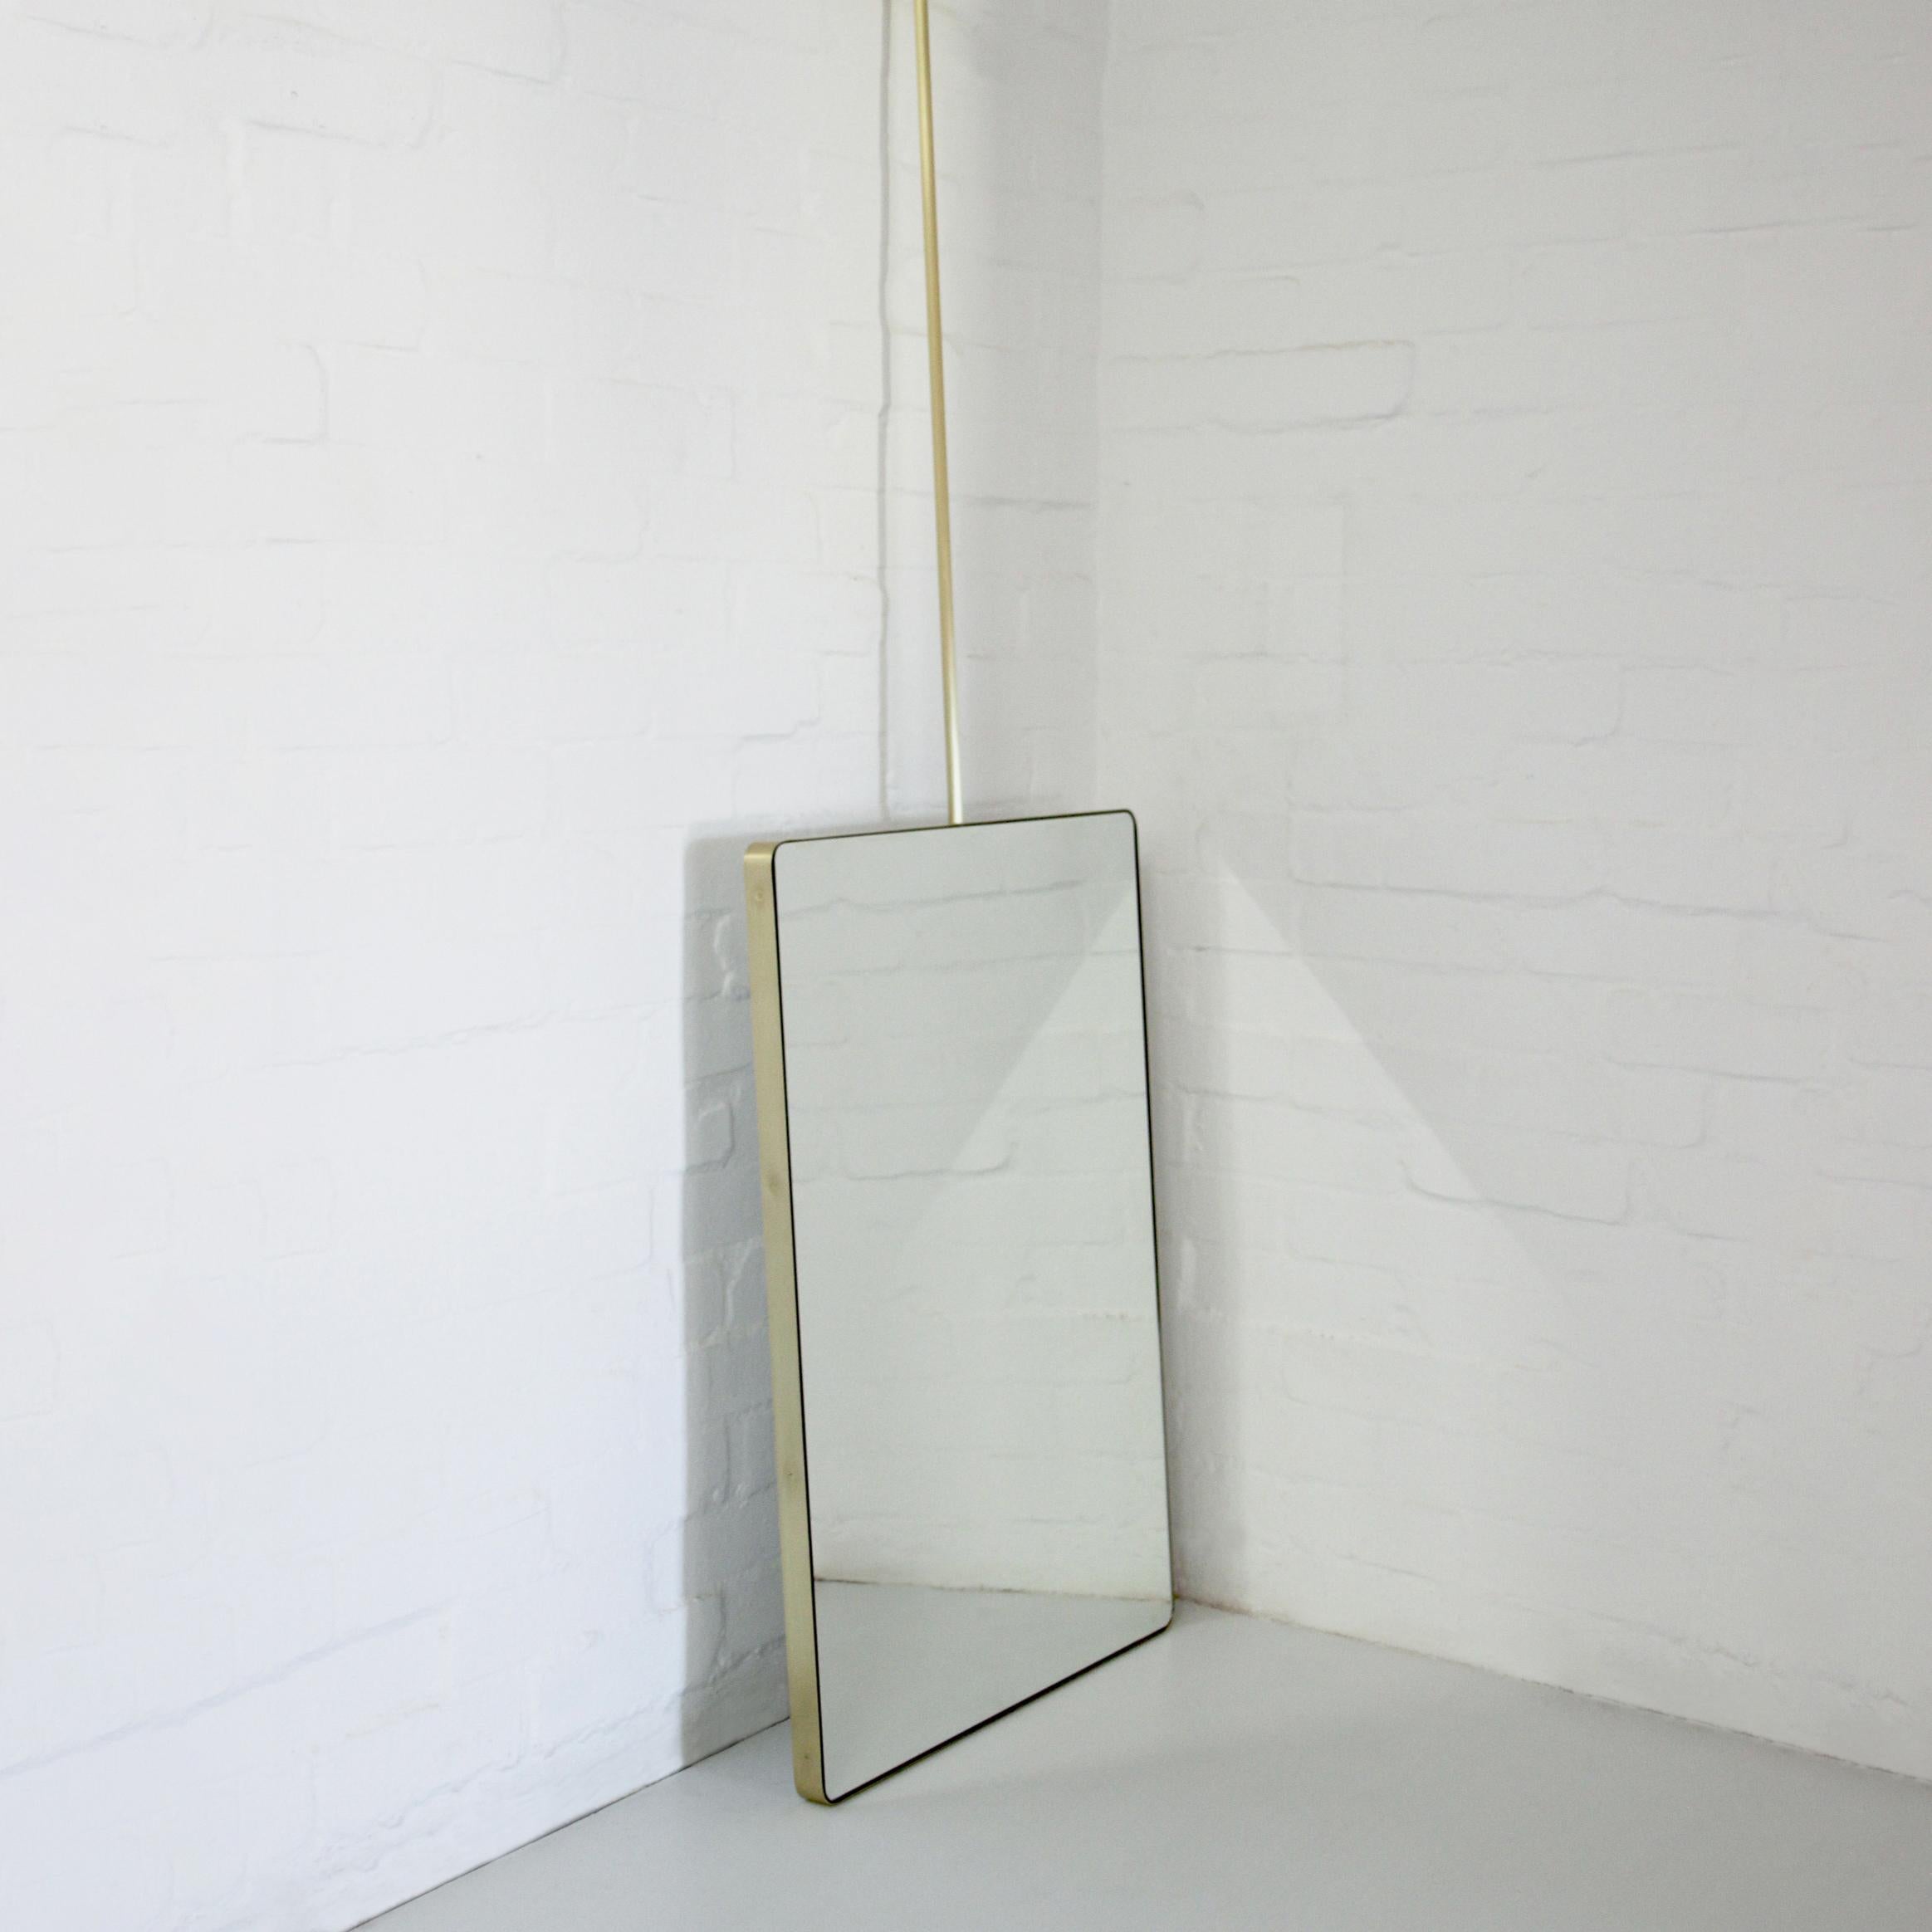 Unique modern ceiling suspended rectangular mirror with an elegant solid brushed brass frame and a slick white aluminium backing.

559mm (22